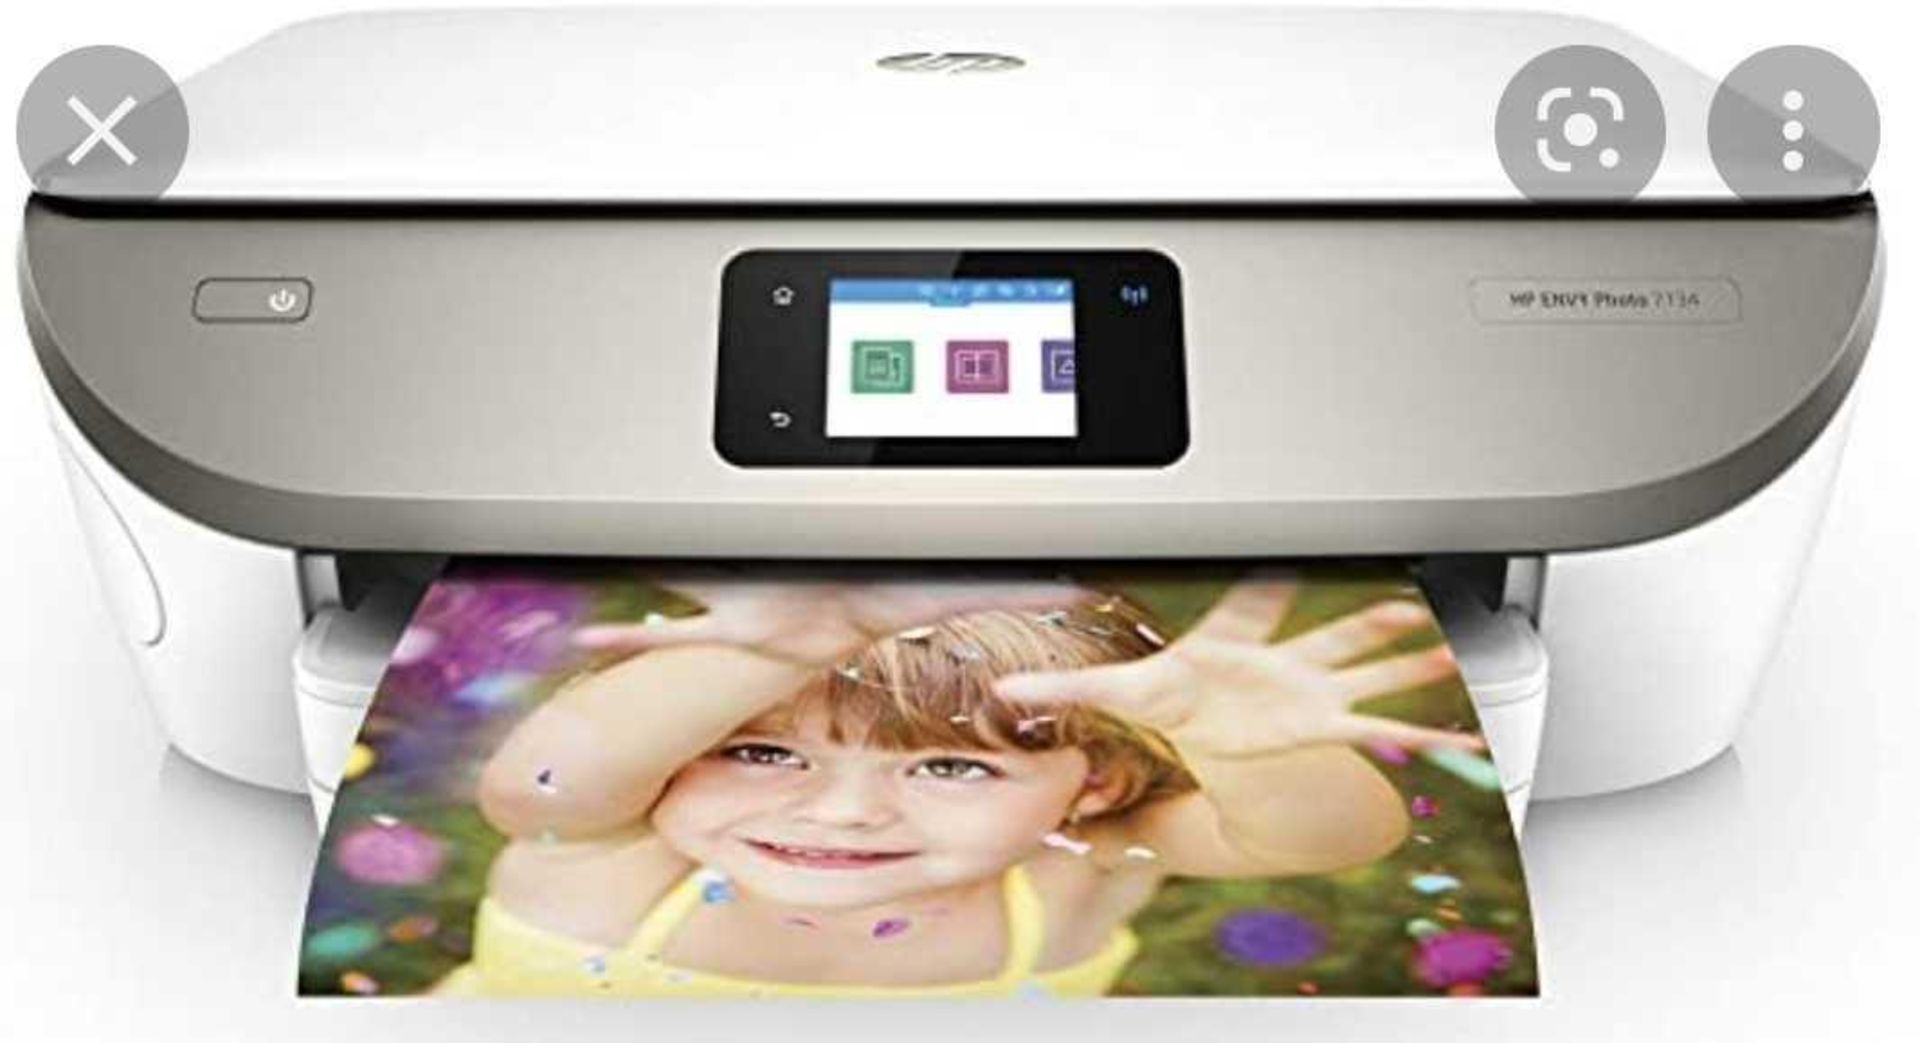 RRP £140 Boxed Hp Envy Photo 7134 All In One Printer